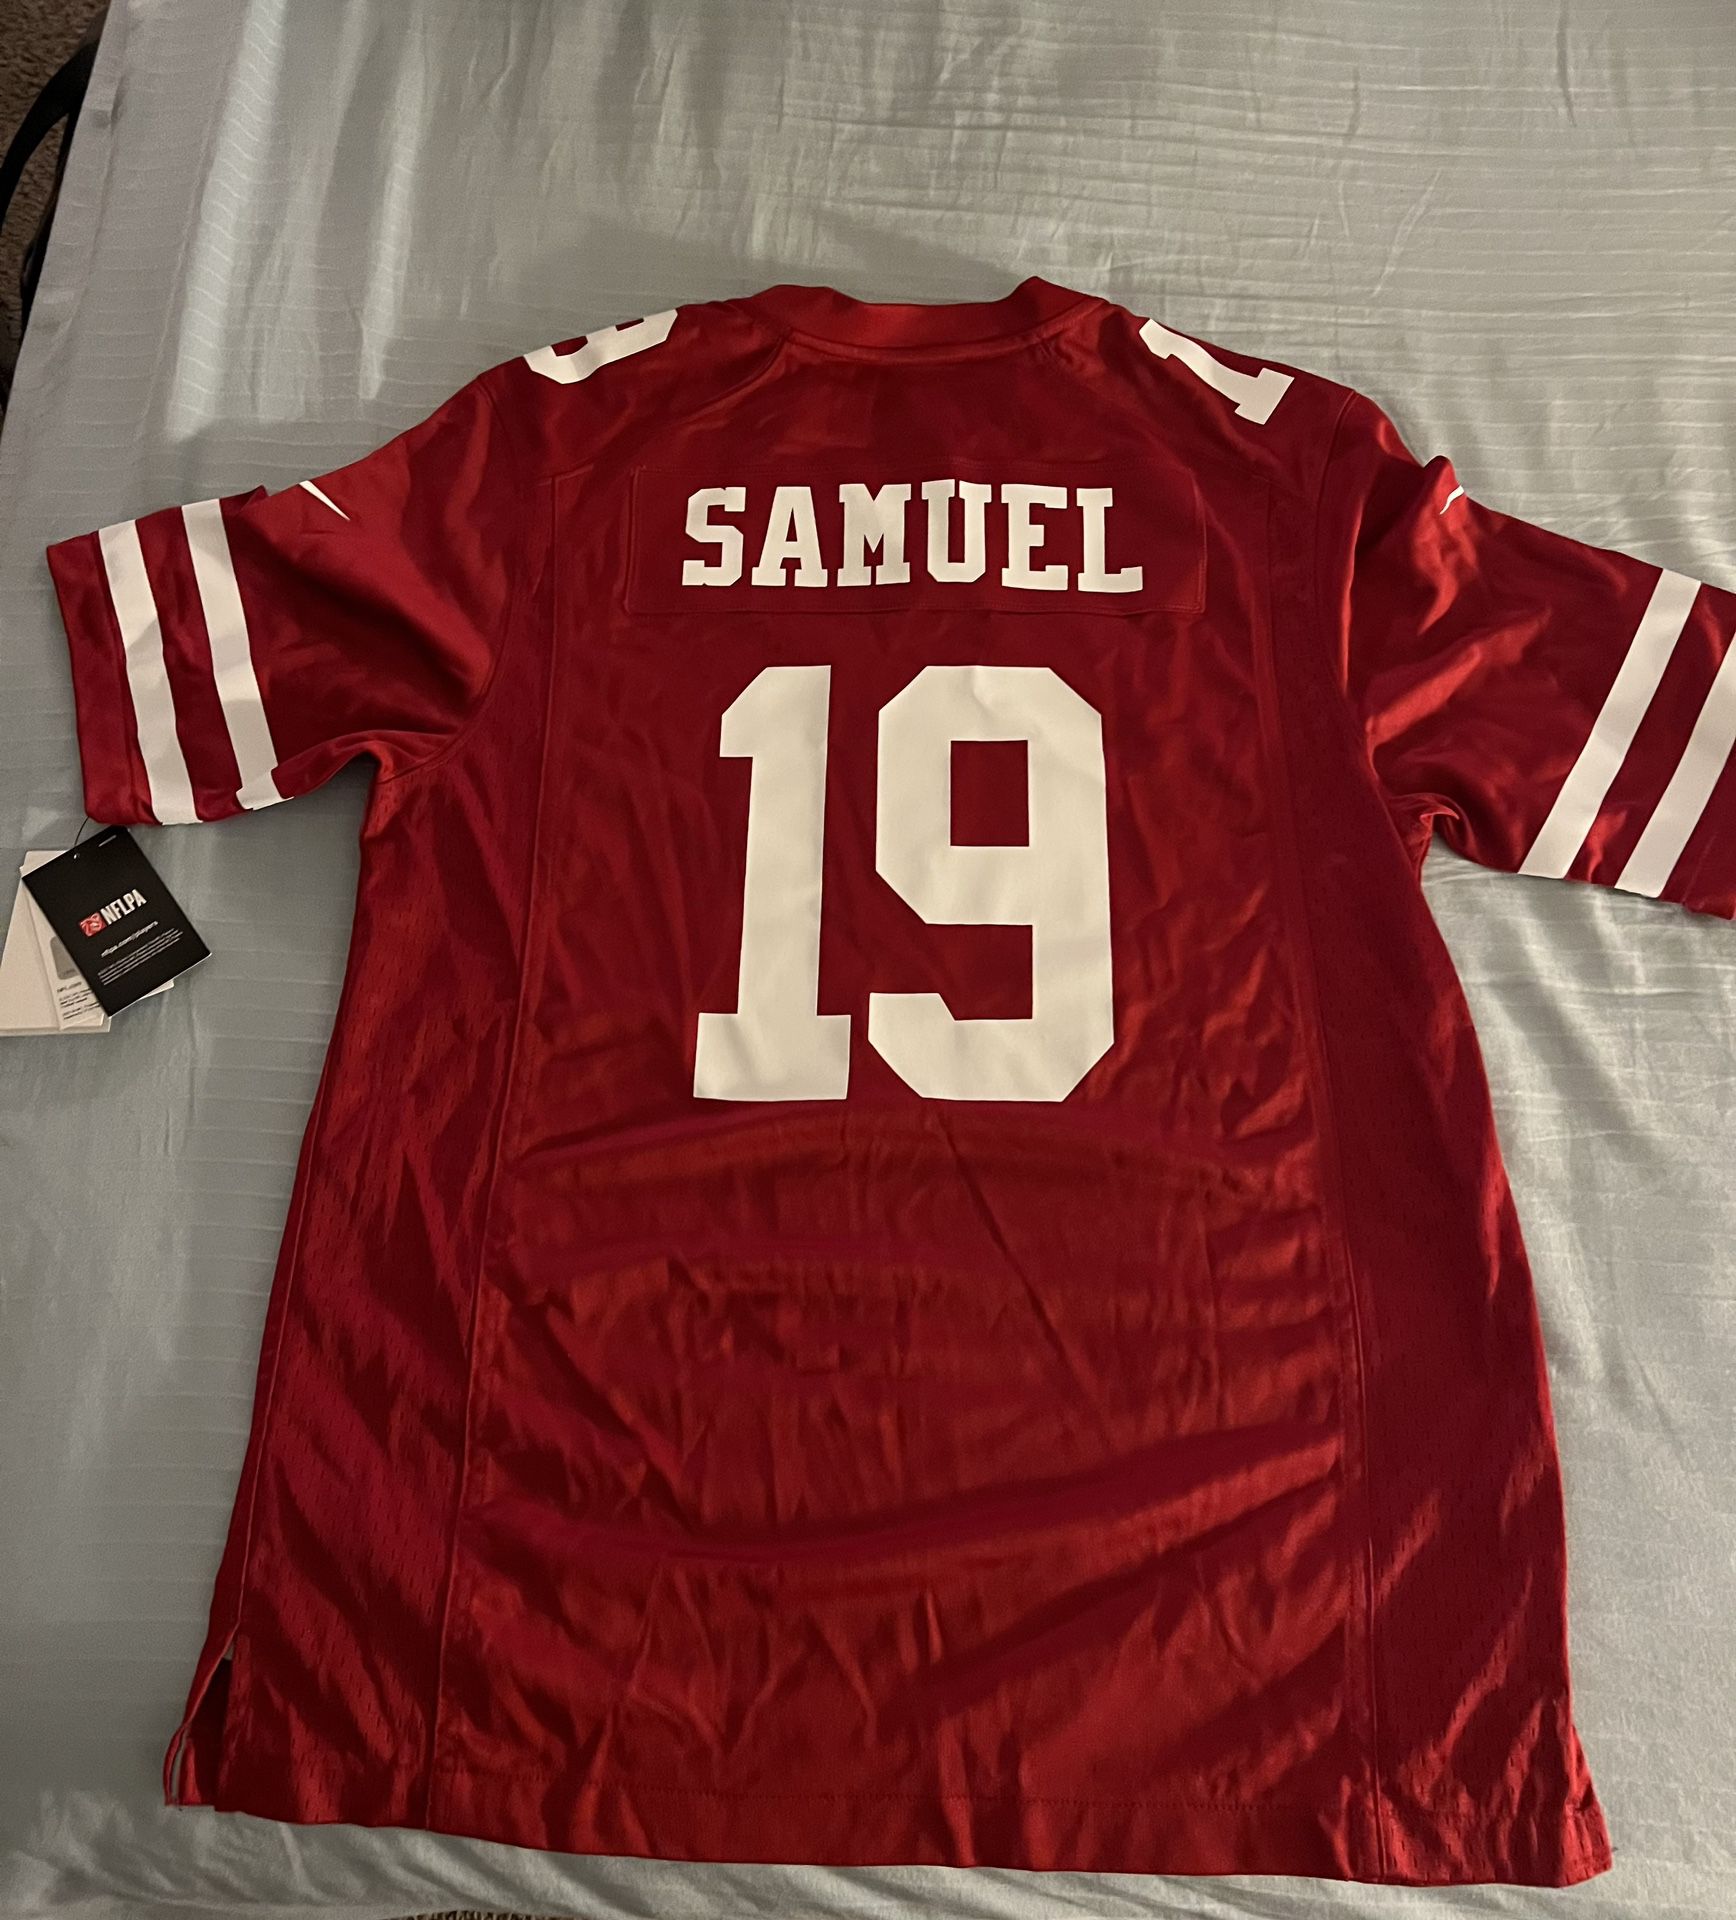 49ers jersey home